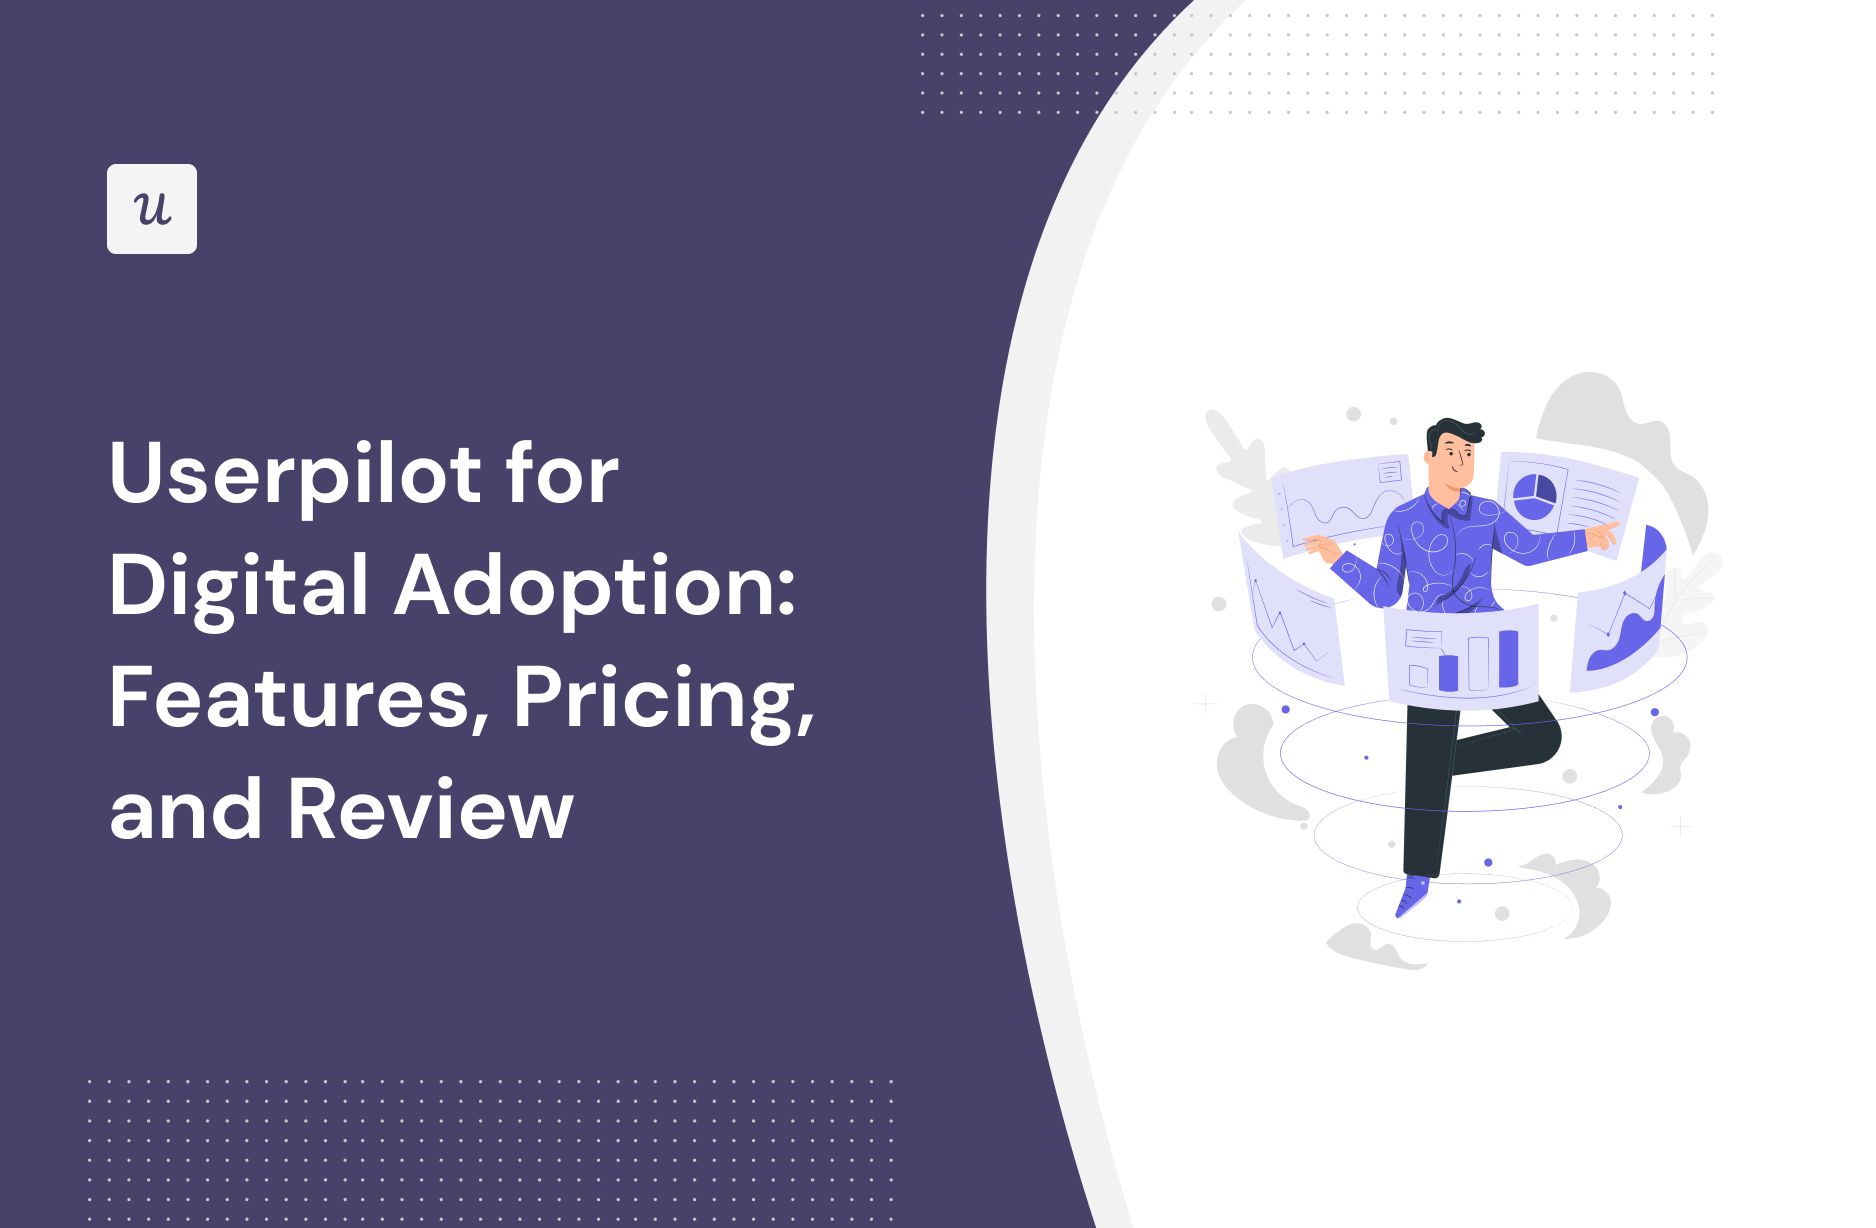 Userpilot for Digital Adoption: Features, Pricing, and Review